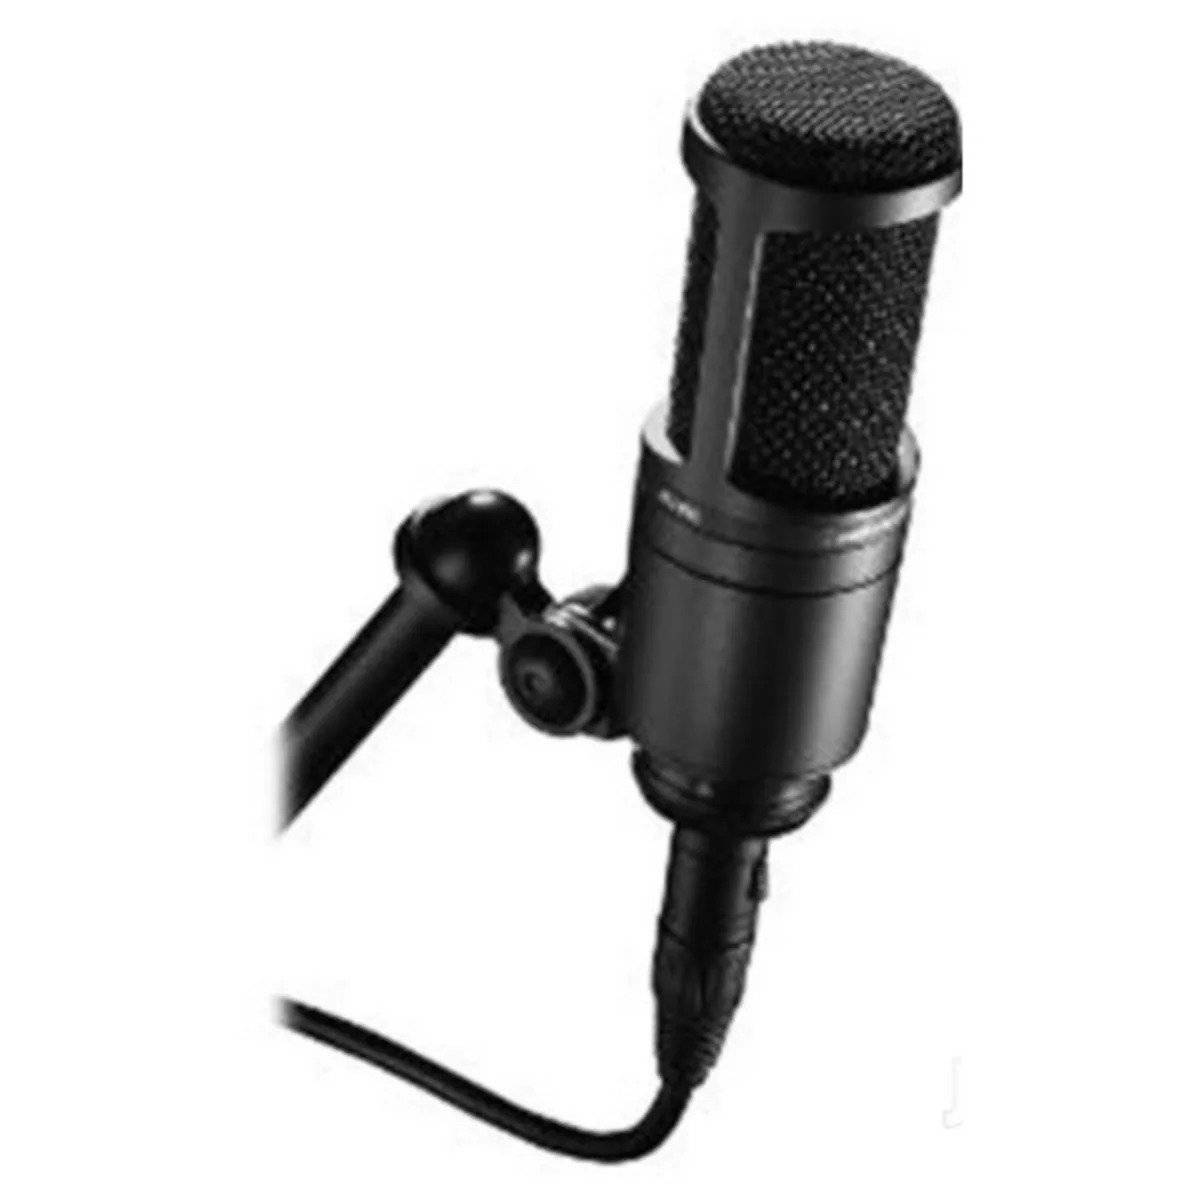 Introduction to the AT2035 Microphone